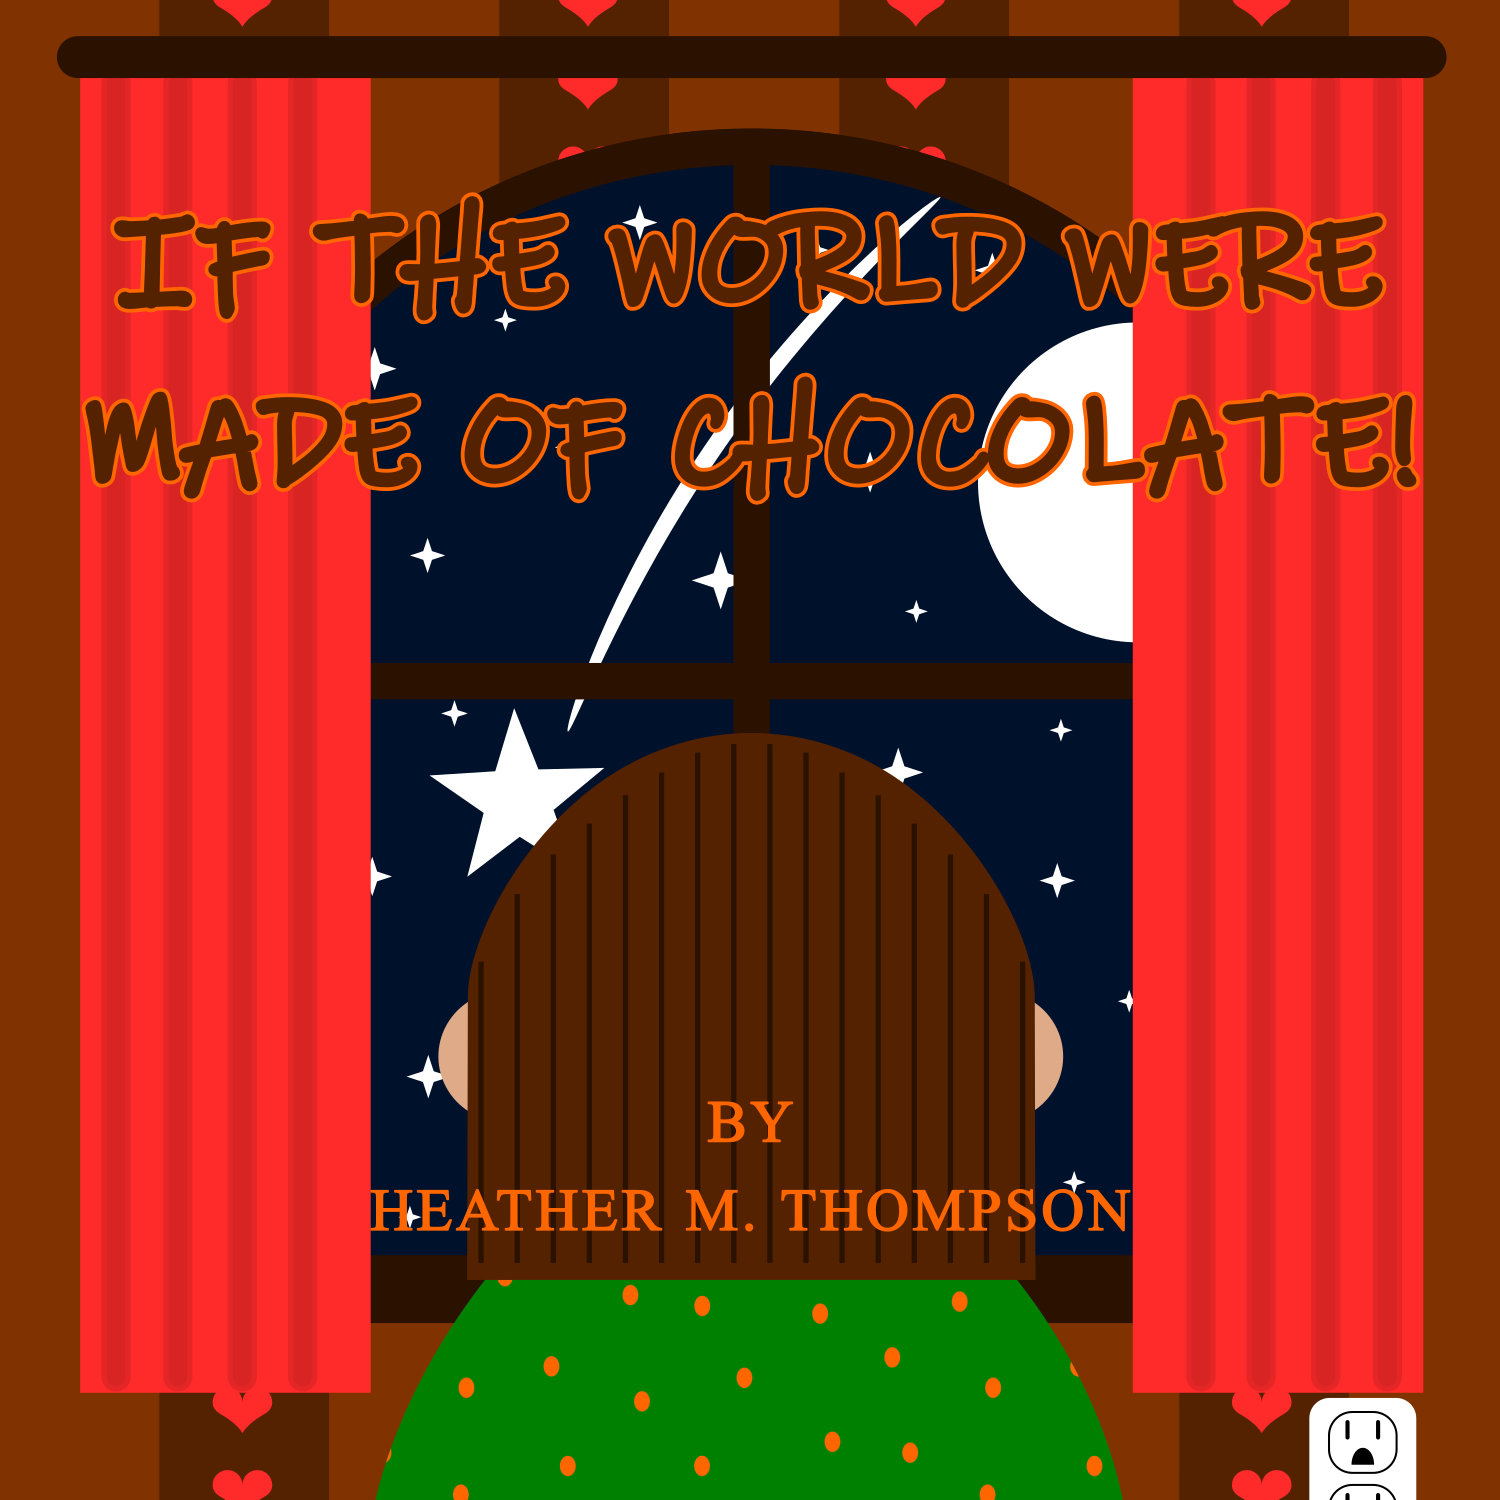 Cover for "If the World Were Made of Chocolate!" by Heather Thompson.